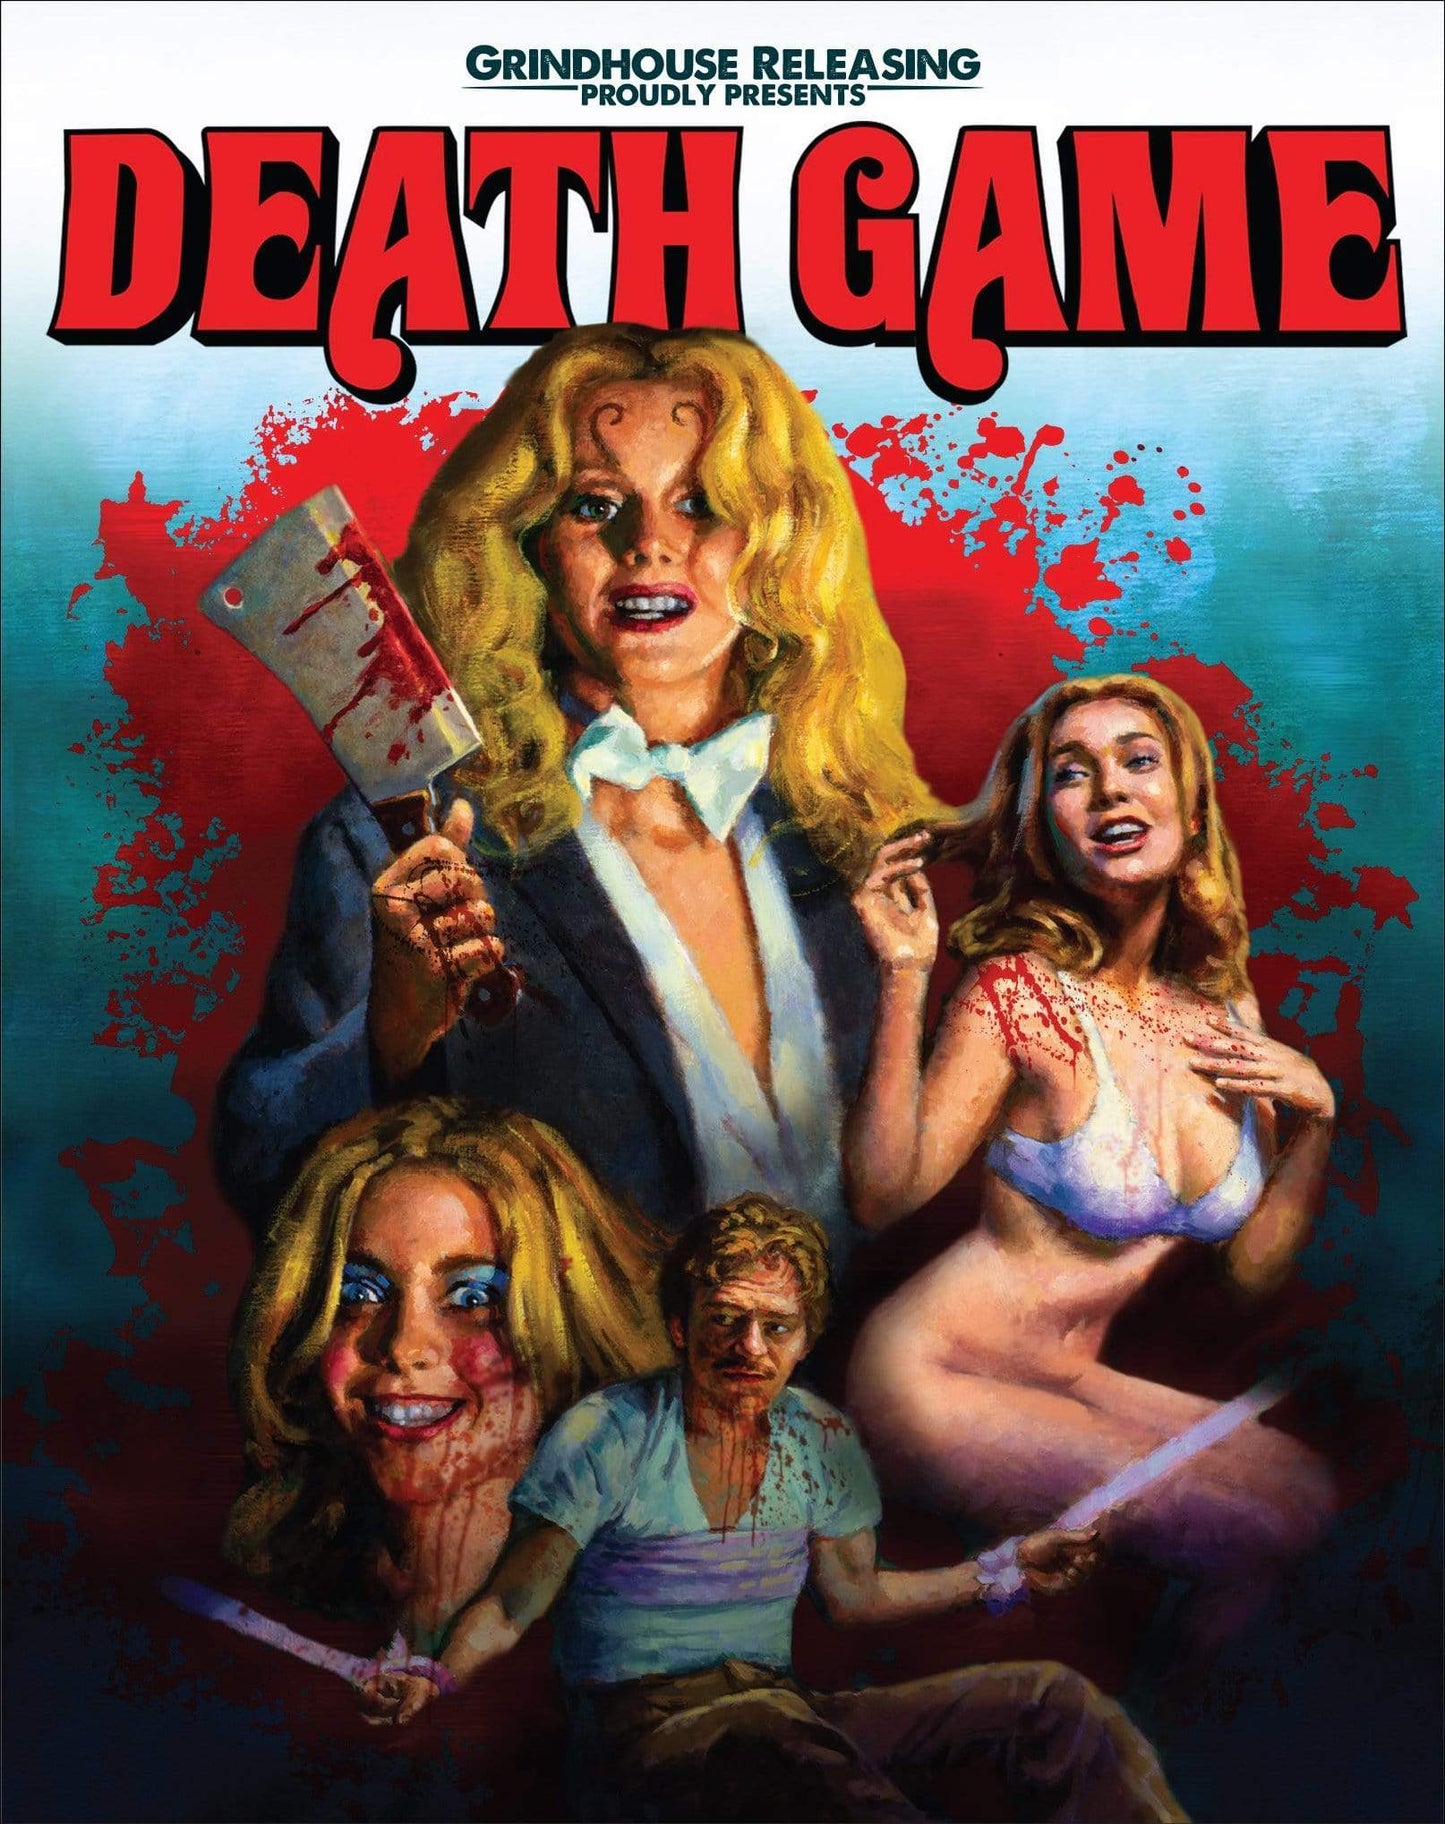 Death Game Limited Edition Grindhouse Releasing Blu-Ray [NEW] [SLIPCOVER]